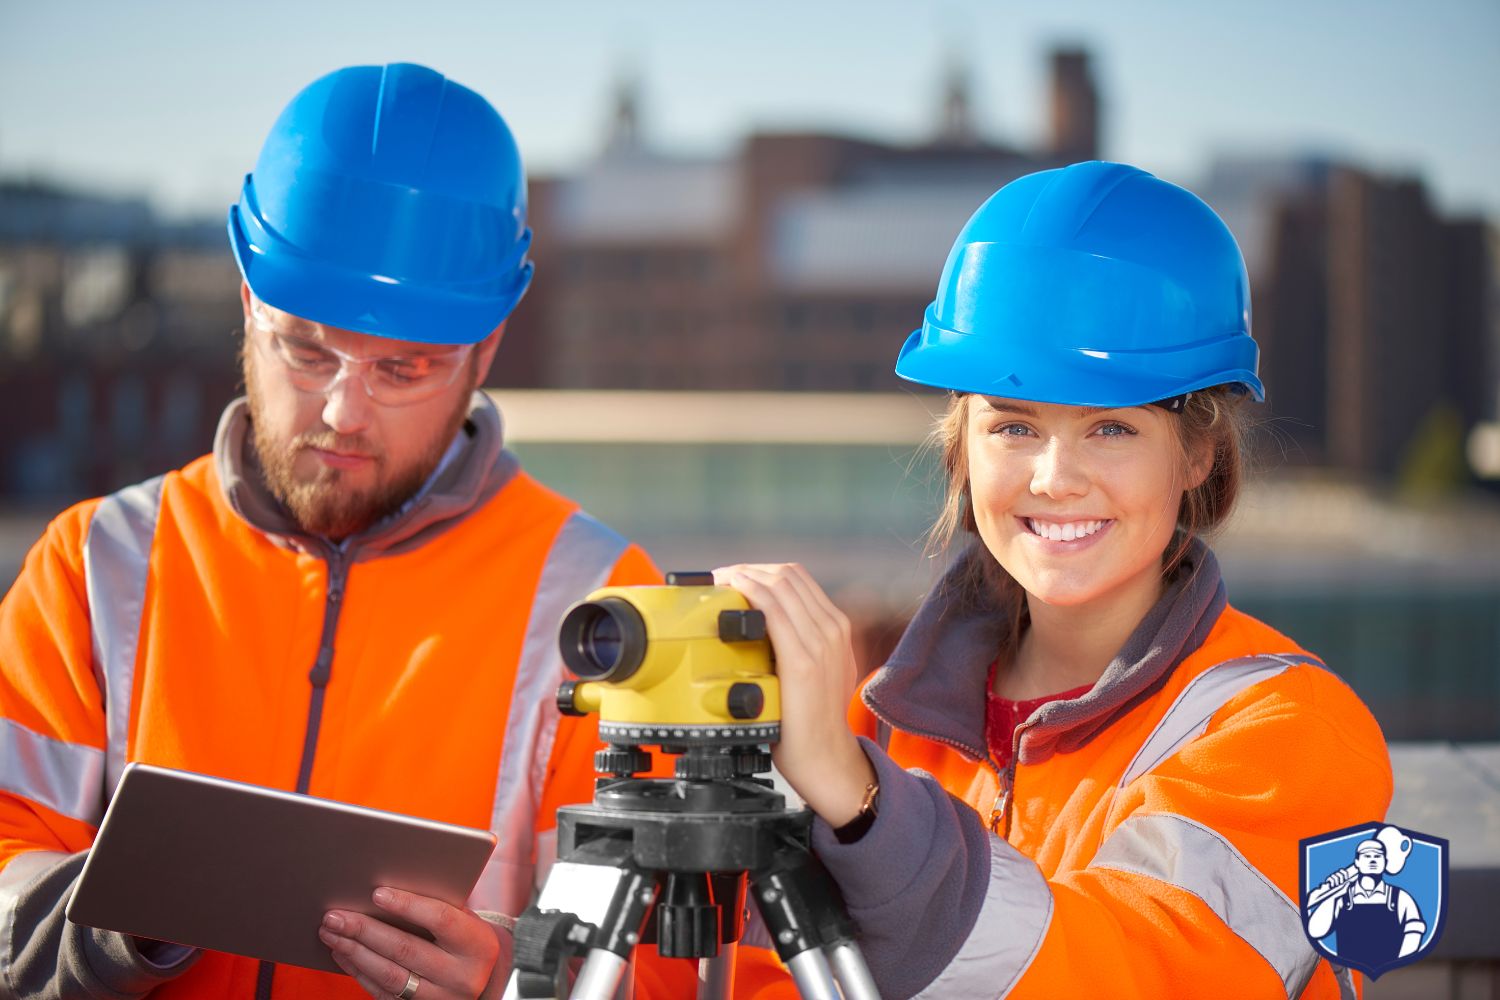 Hiring a Quantity Surveyor for On-Site Evaluations: Why It’s So Important